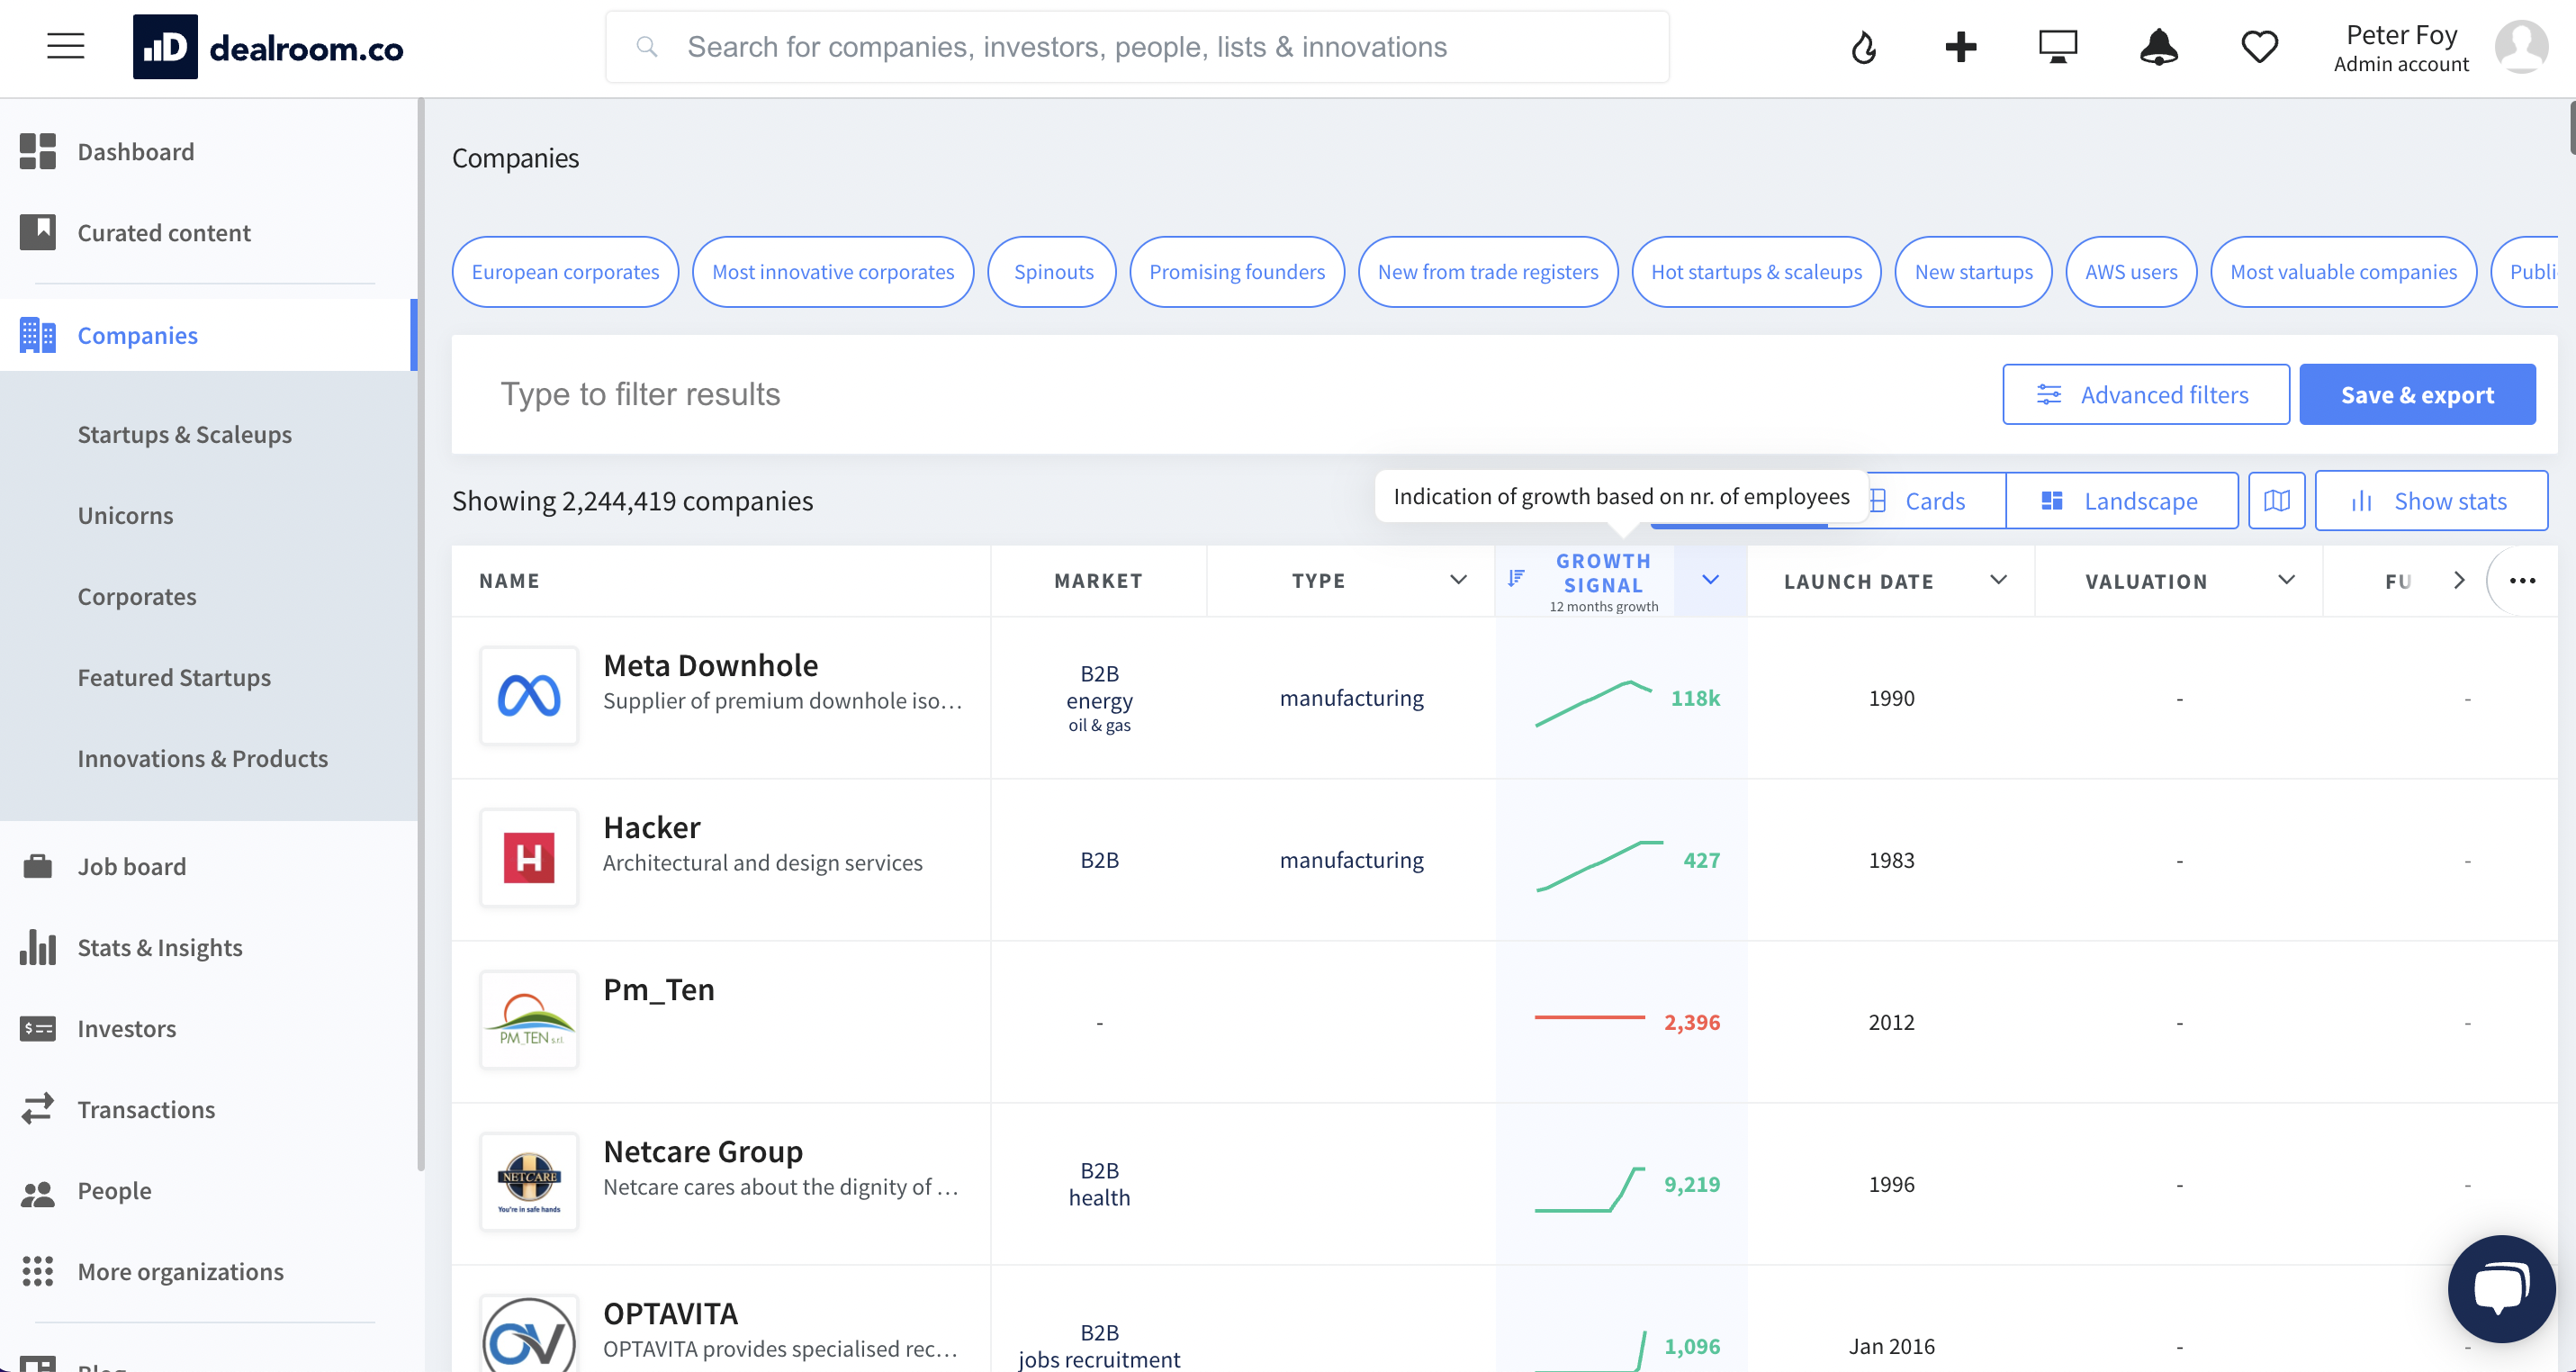 Search through, filter, and discover 2M+ startups based on 100+ data points